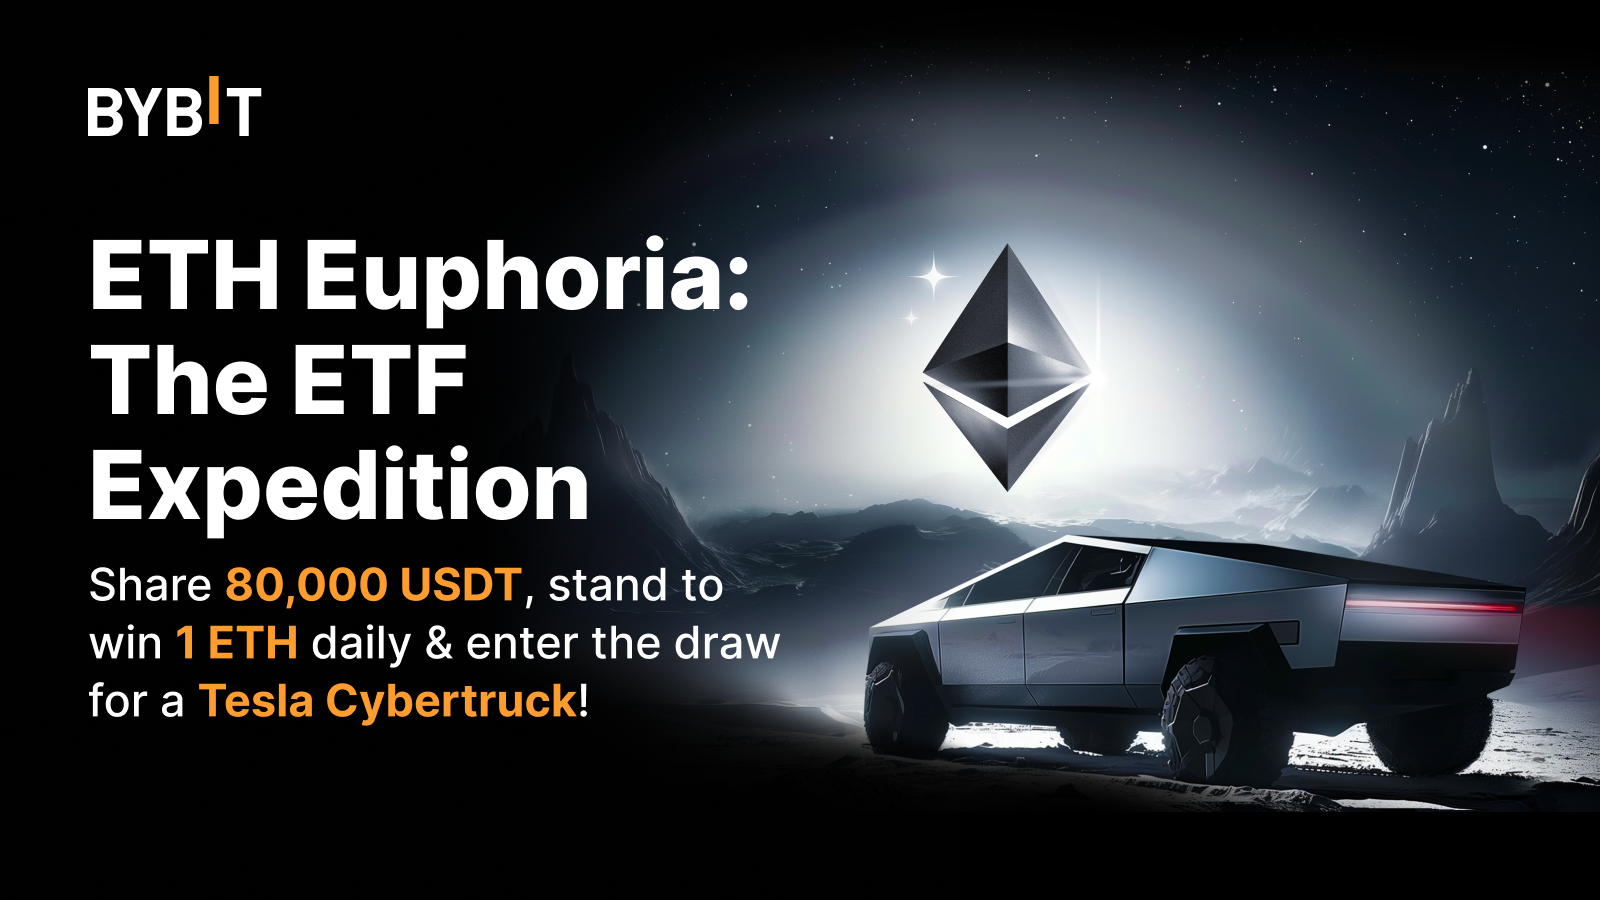 Bybit Launches “Ethereum Euphoria” Campaign, Offering Tesla Cybertruck and USDT, ETH Prizes